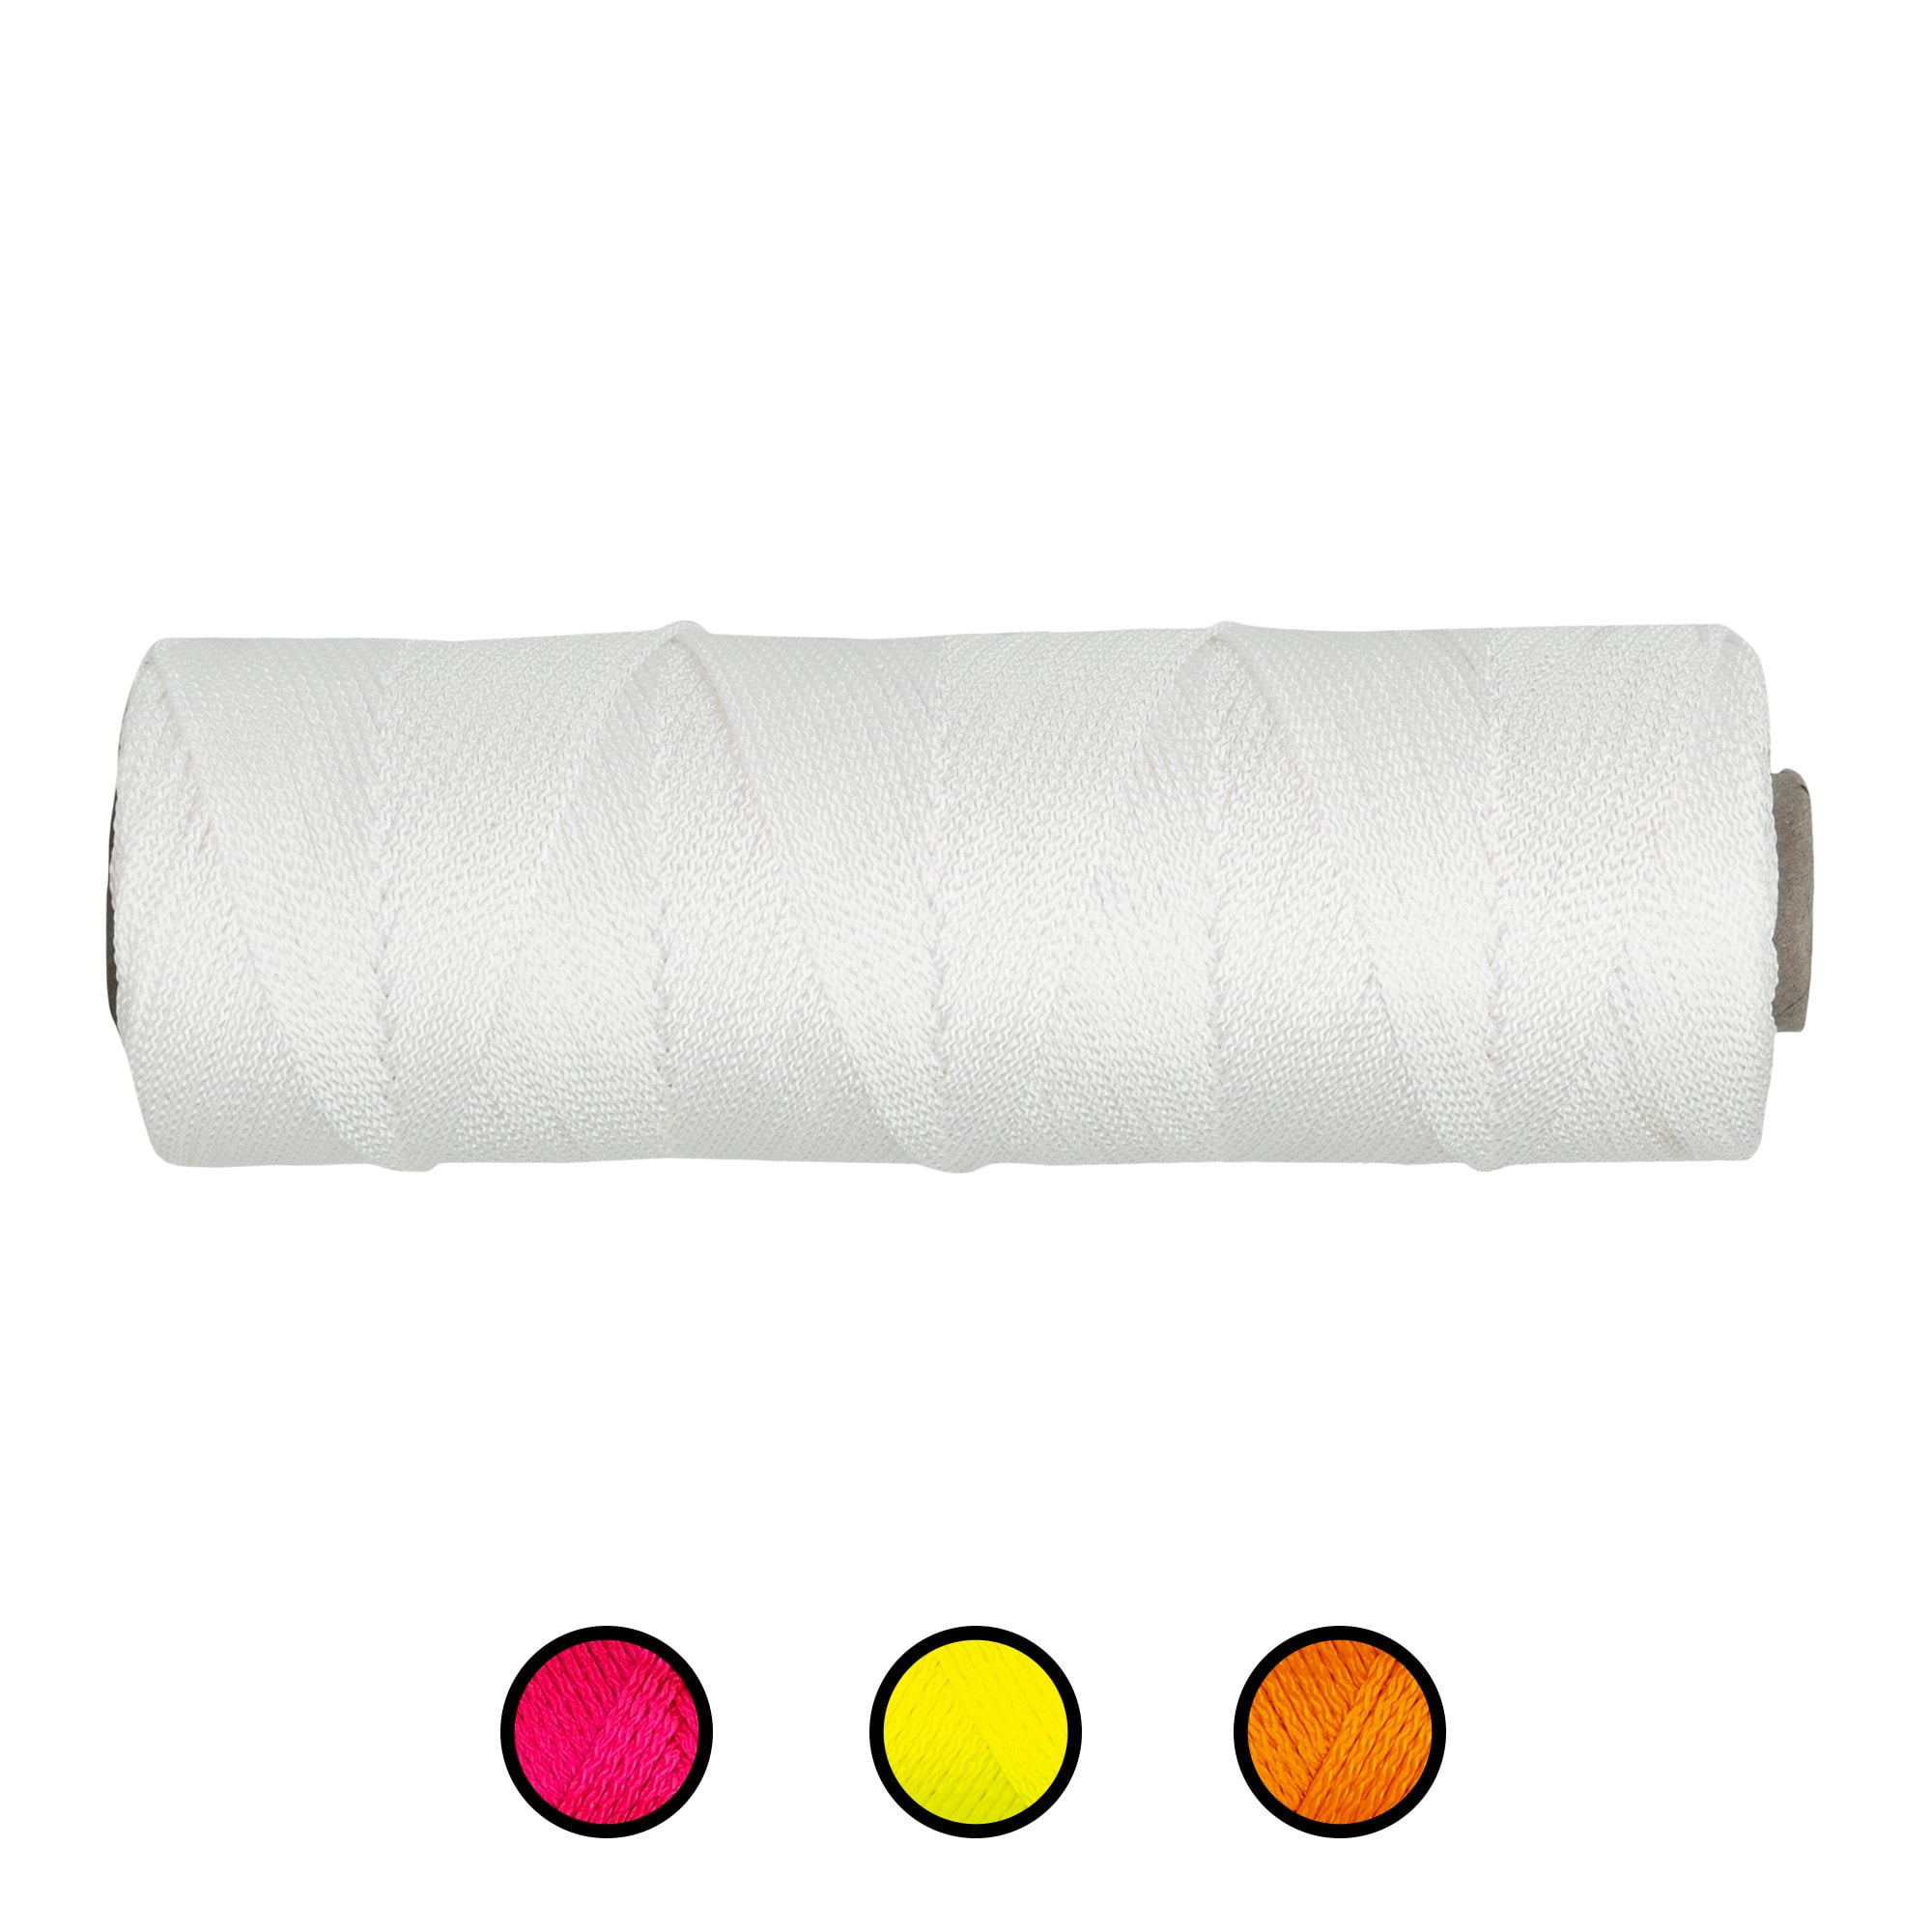 Braided Nylon Mason Line #18 - SGT KNOTS - Moisture, Oil, Acid, Rot  Resistant - Twine String Masonry, Marine, DIY Projects, Crafting,  Commercial, Gardening use (500 feet - White) 